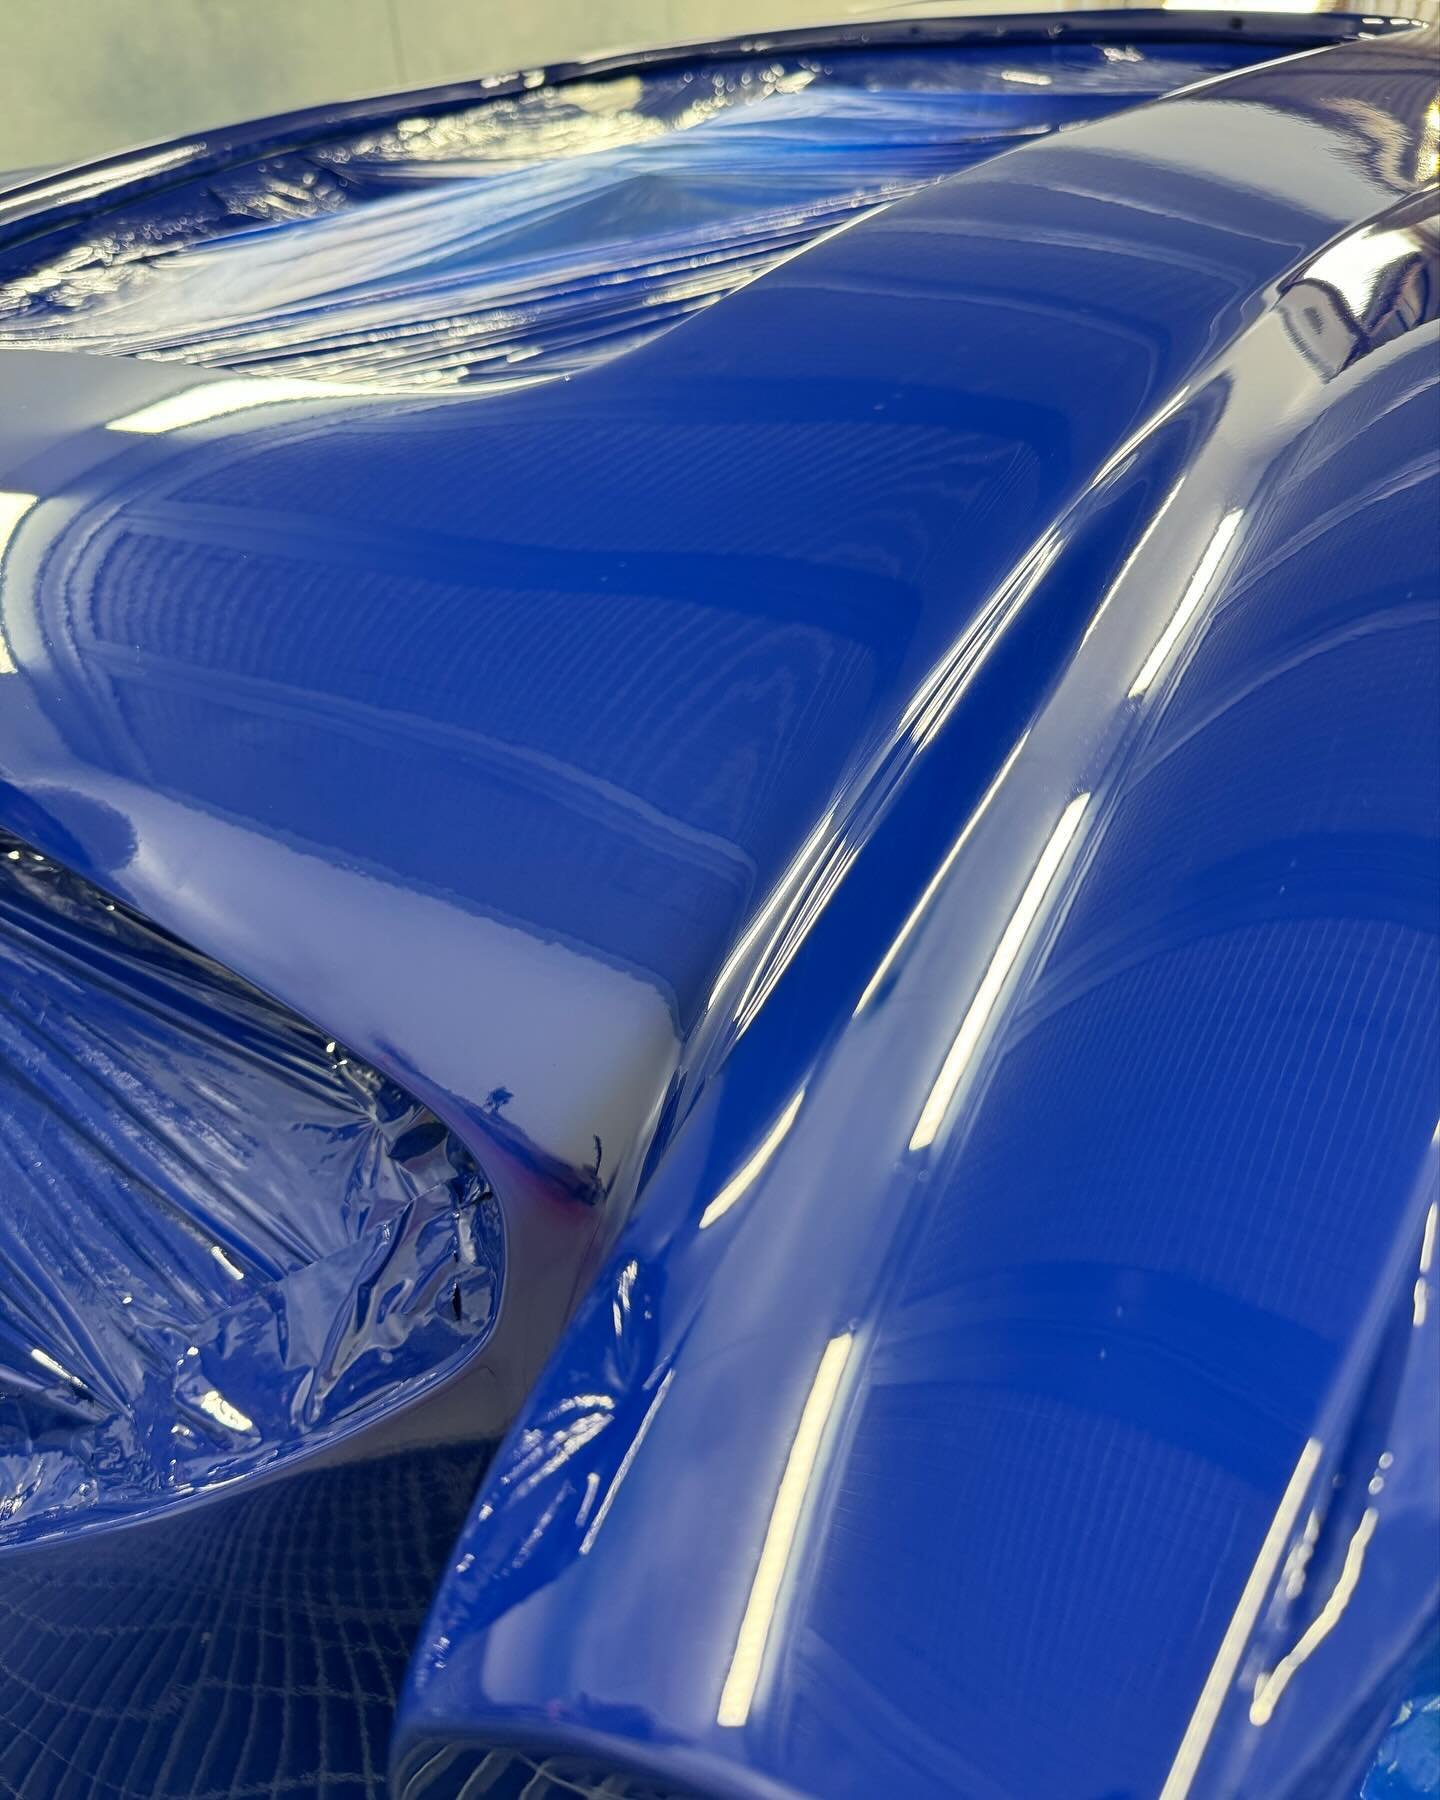 One last push to get this truly beautiful colour combo on this #austinhealey consisting of Lobelia Blue on top and Ice Blue on the bottom, as per original spec. 

#classiccarrestoration #classiccar #suffolk #austinhealey100m